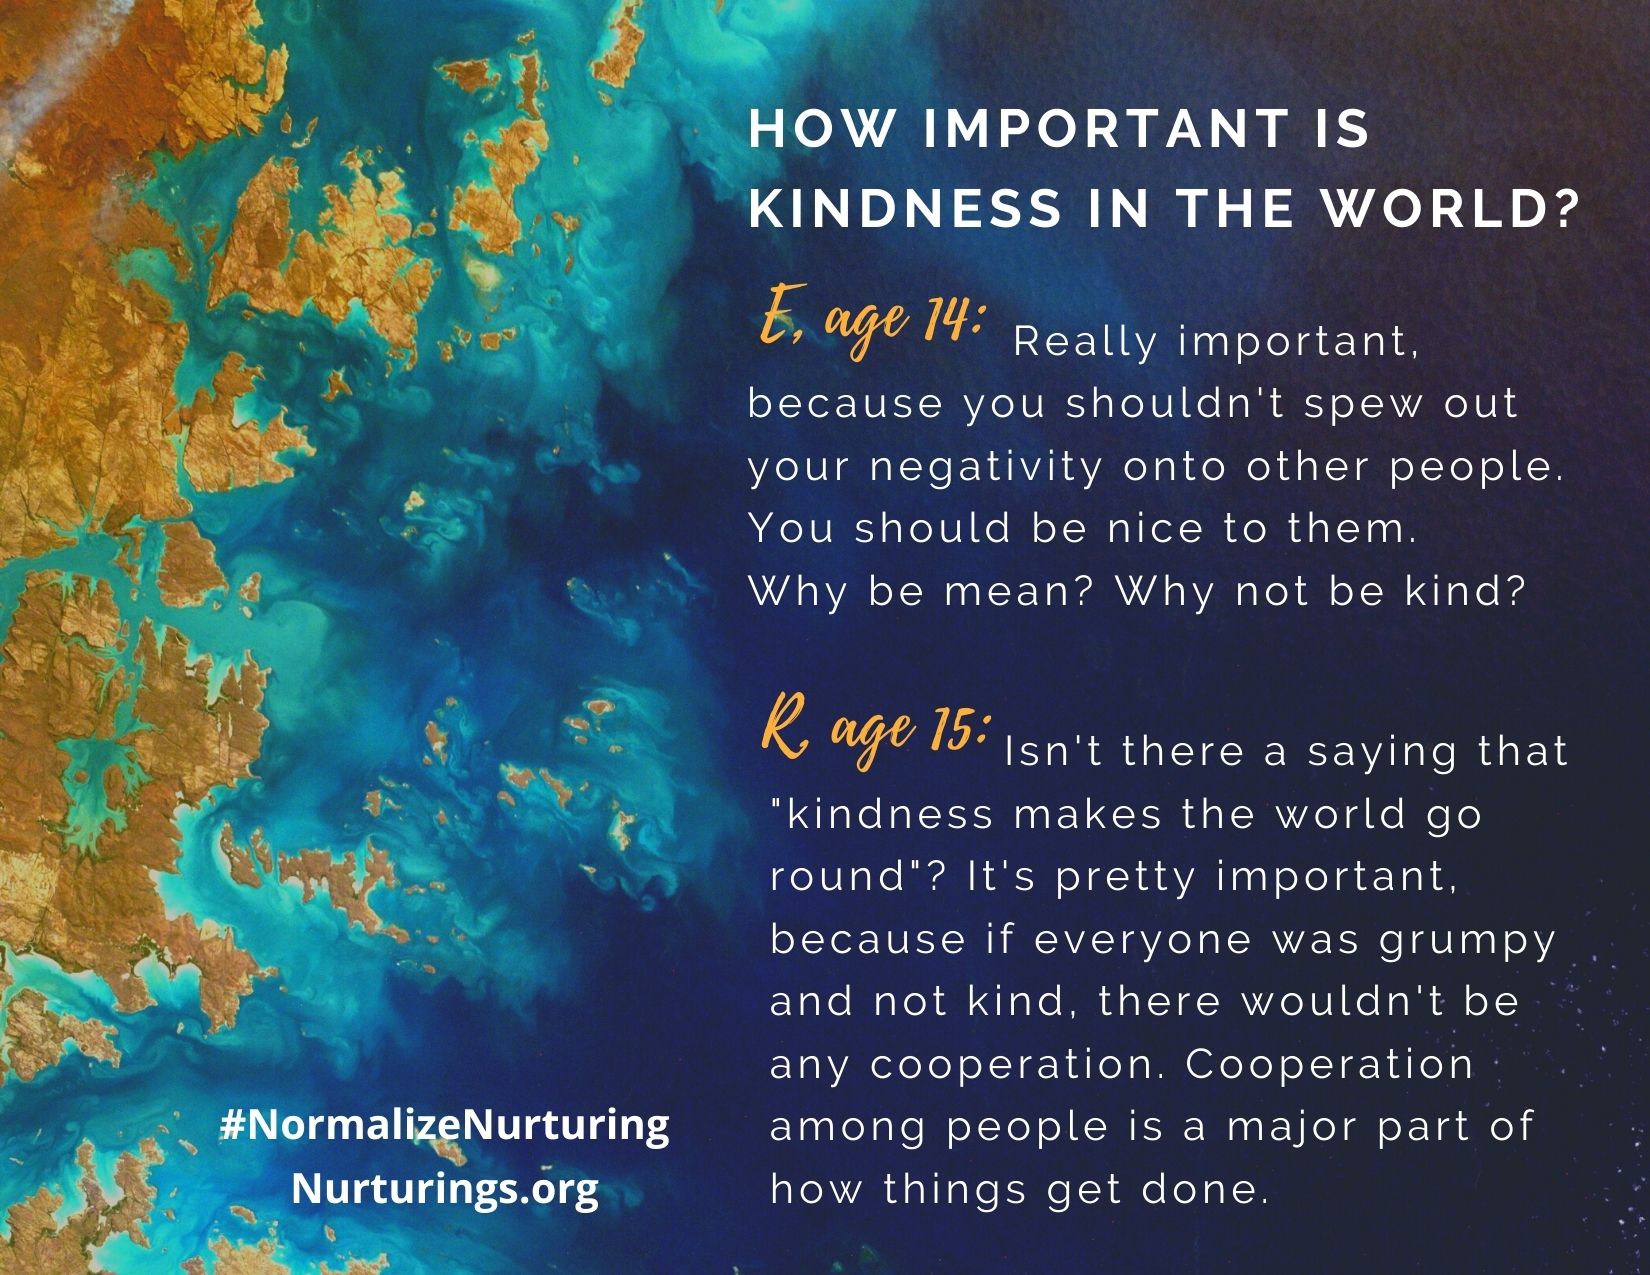 We ask teens about the importance of kindness in our world